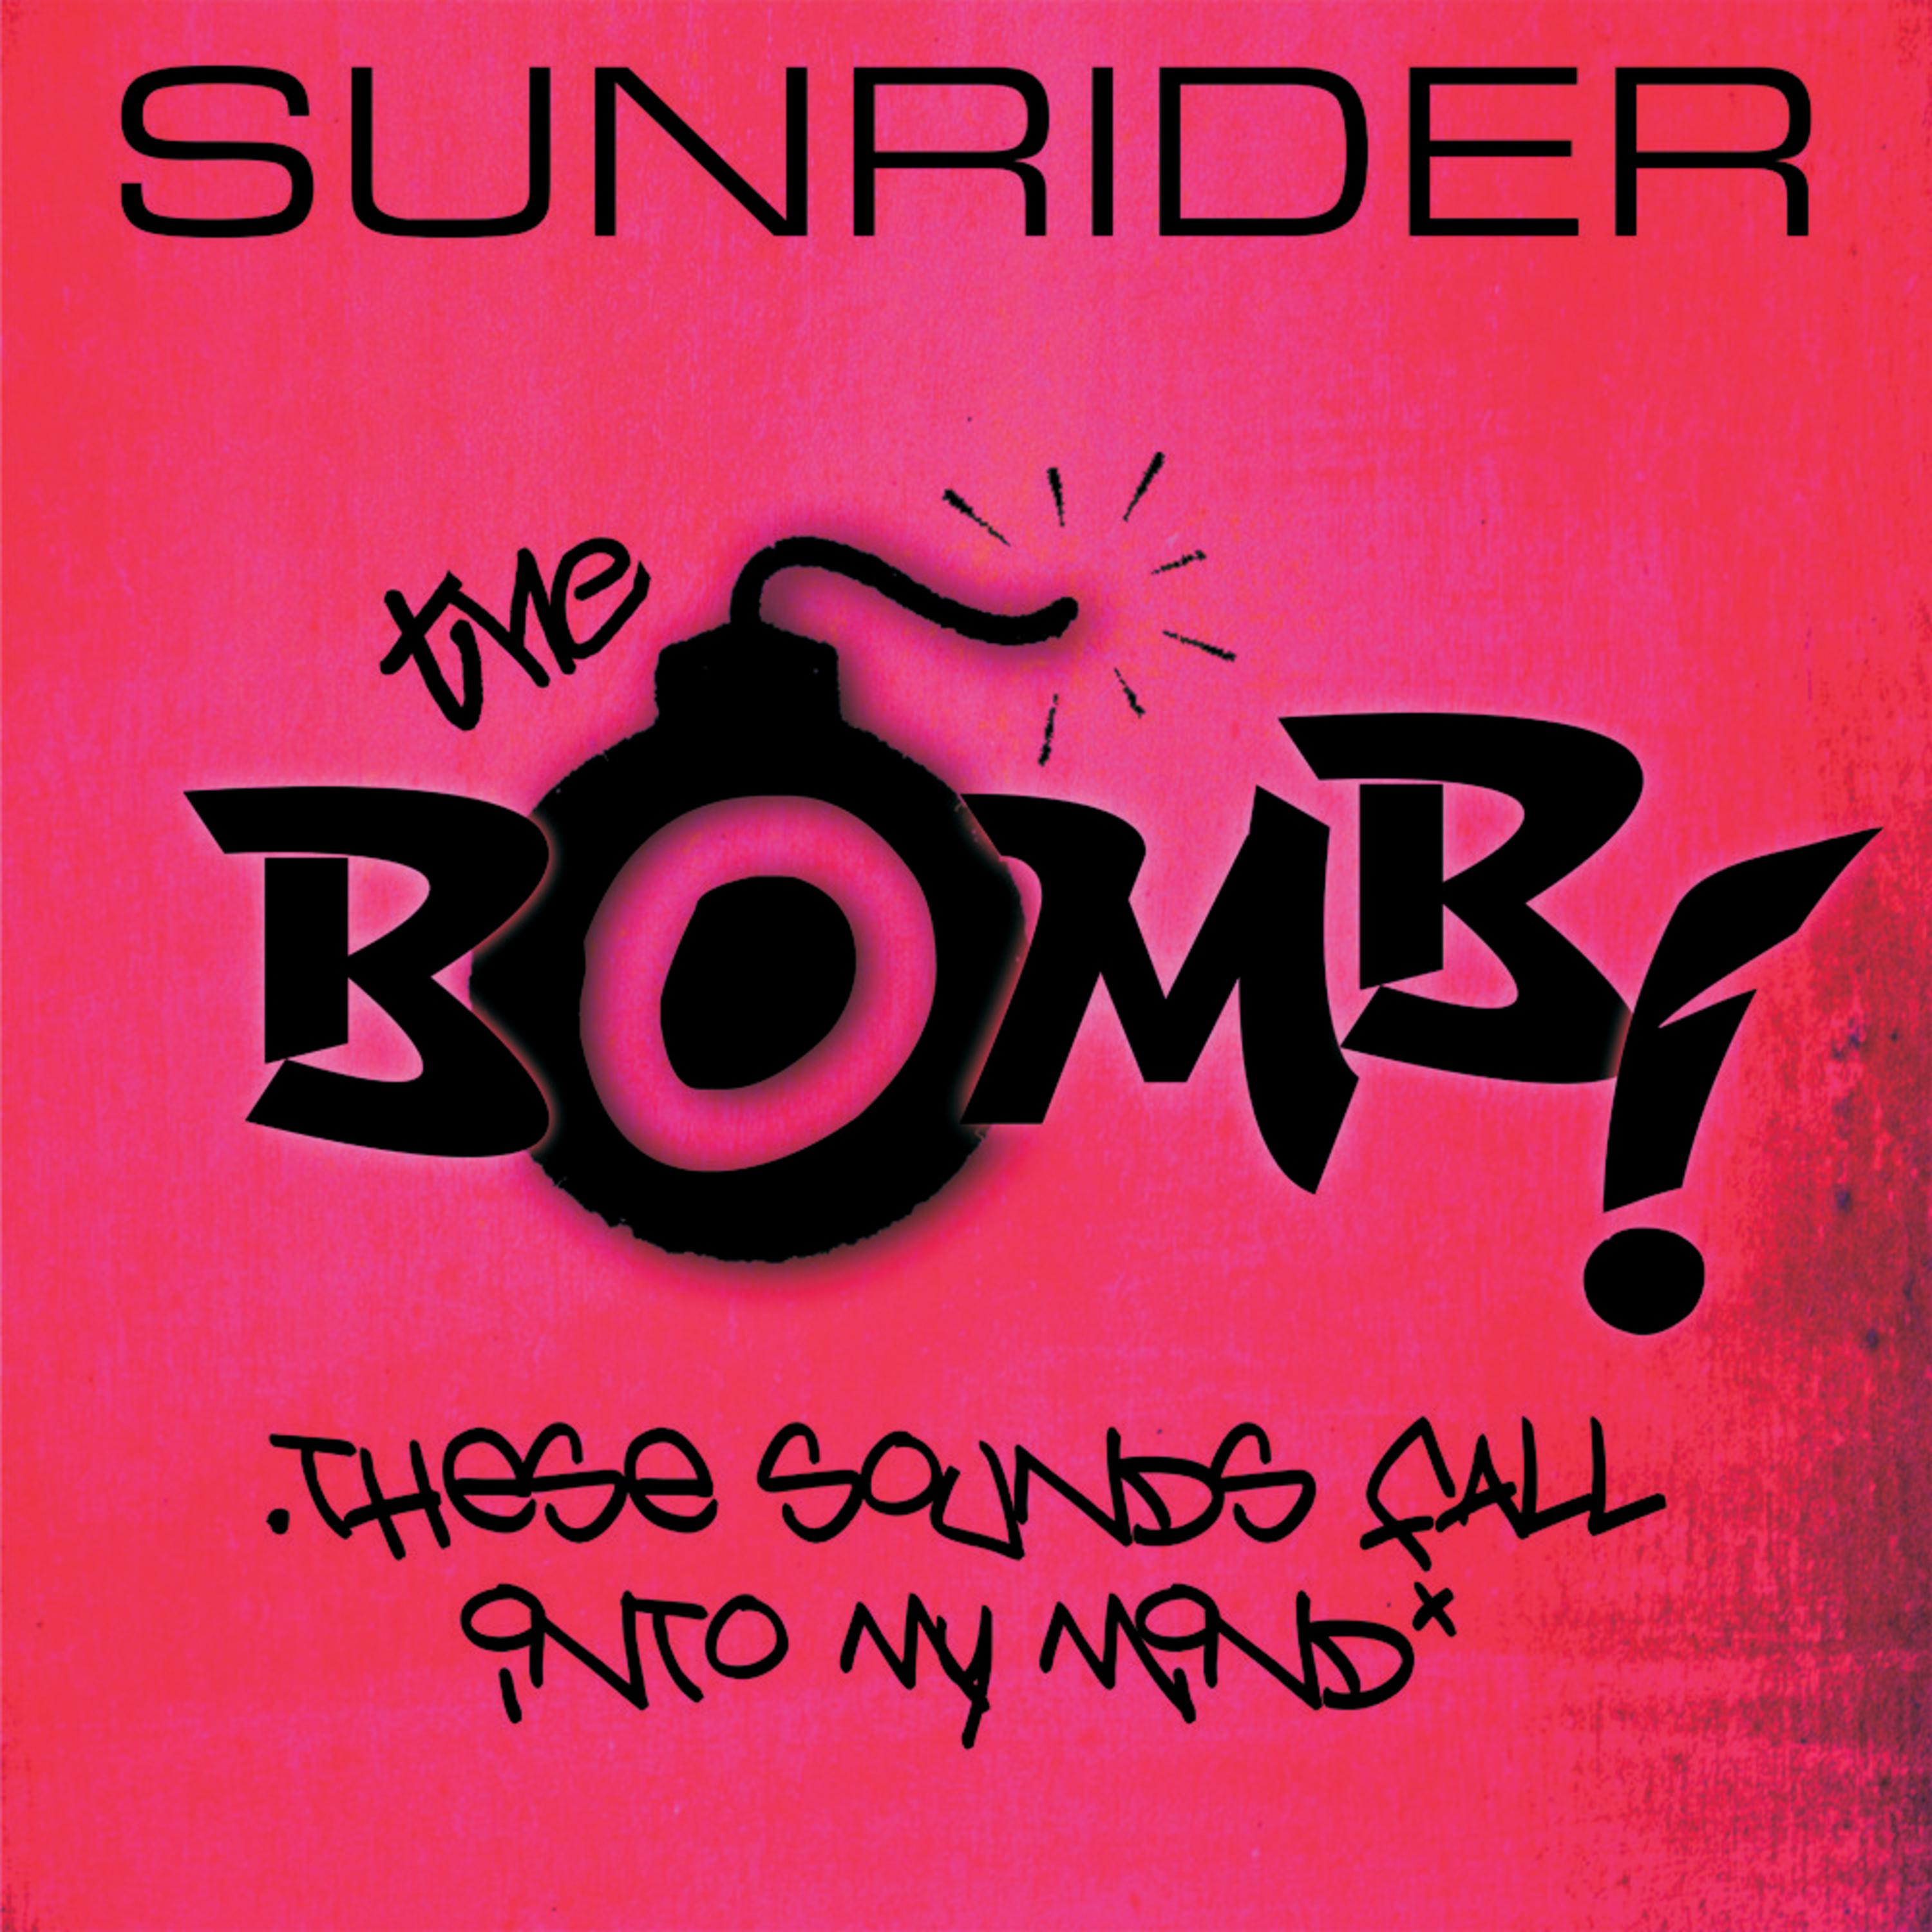 The Bomb (These Sounds Fall Into My Mind) (Original Extended Mix)